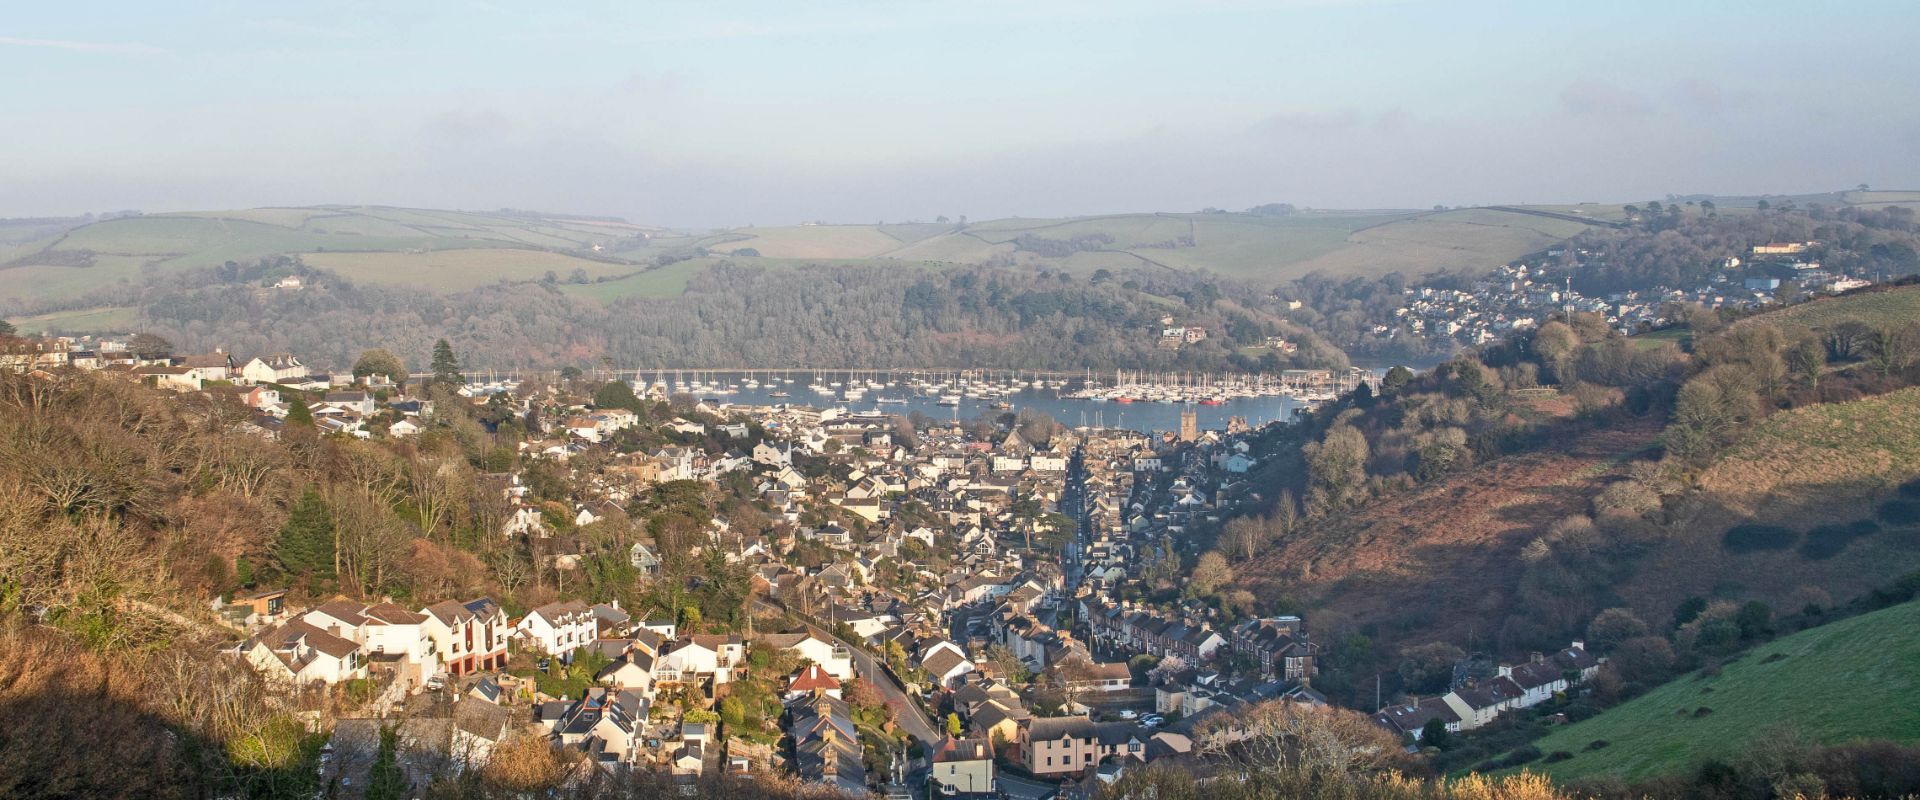 The view from Hangman's Cross in Dartmouth